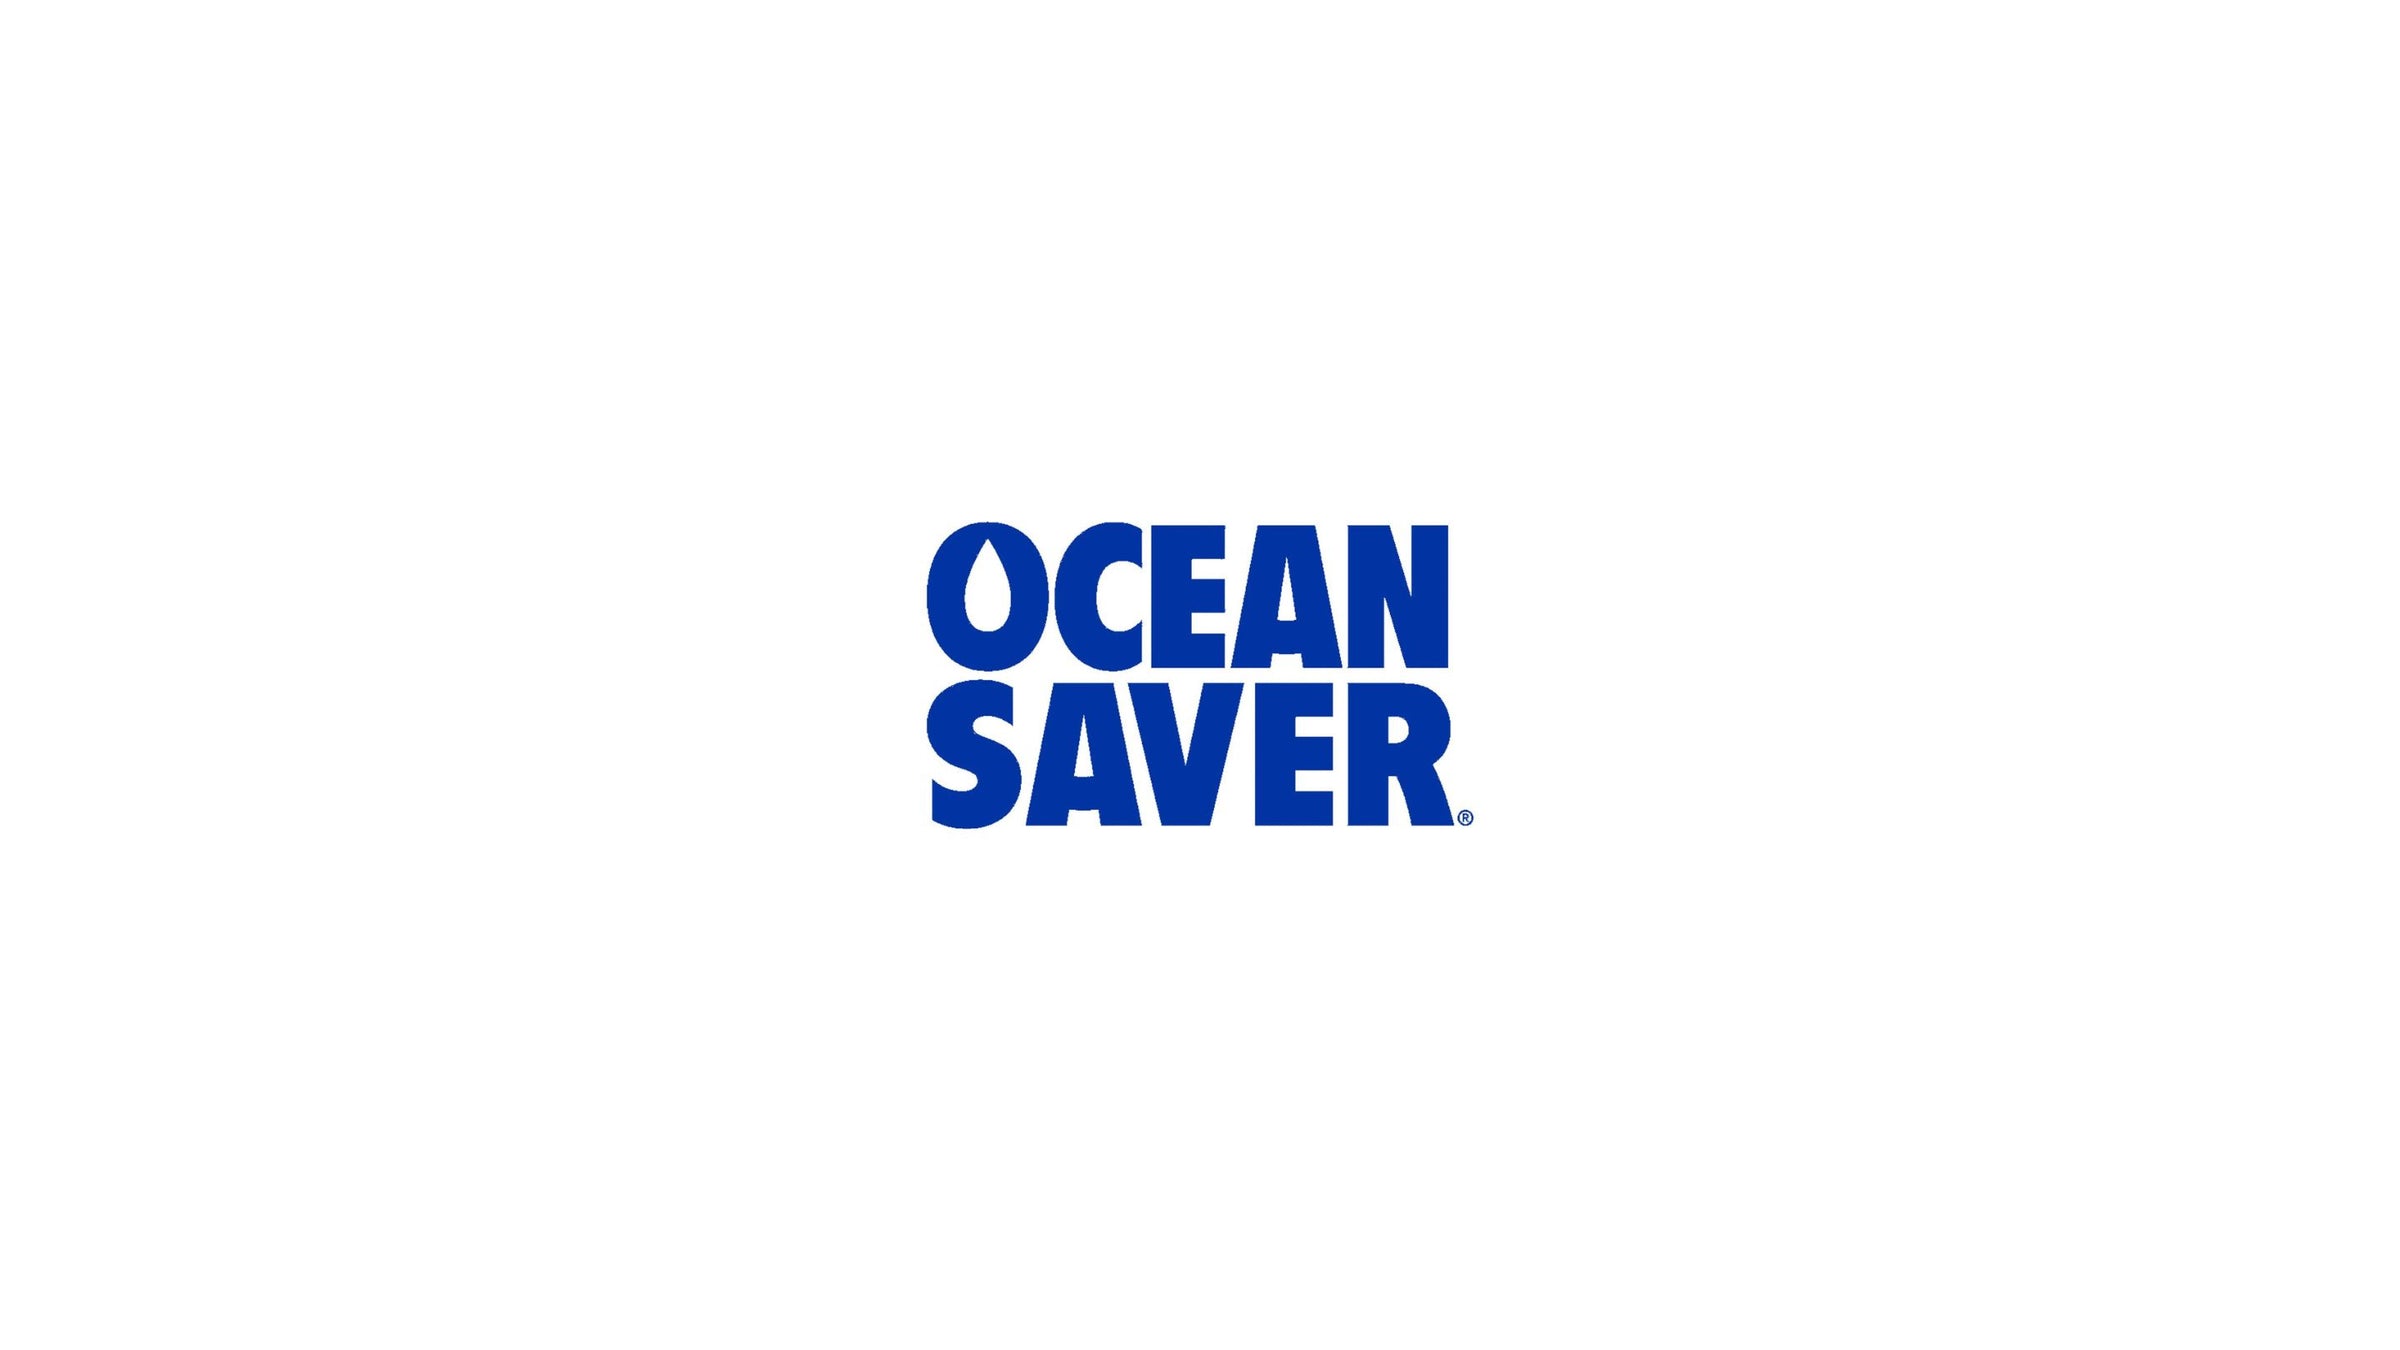 Ocean saver logo. The words ocean and saver in bold blue text with a water drop inside the O